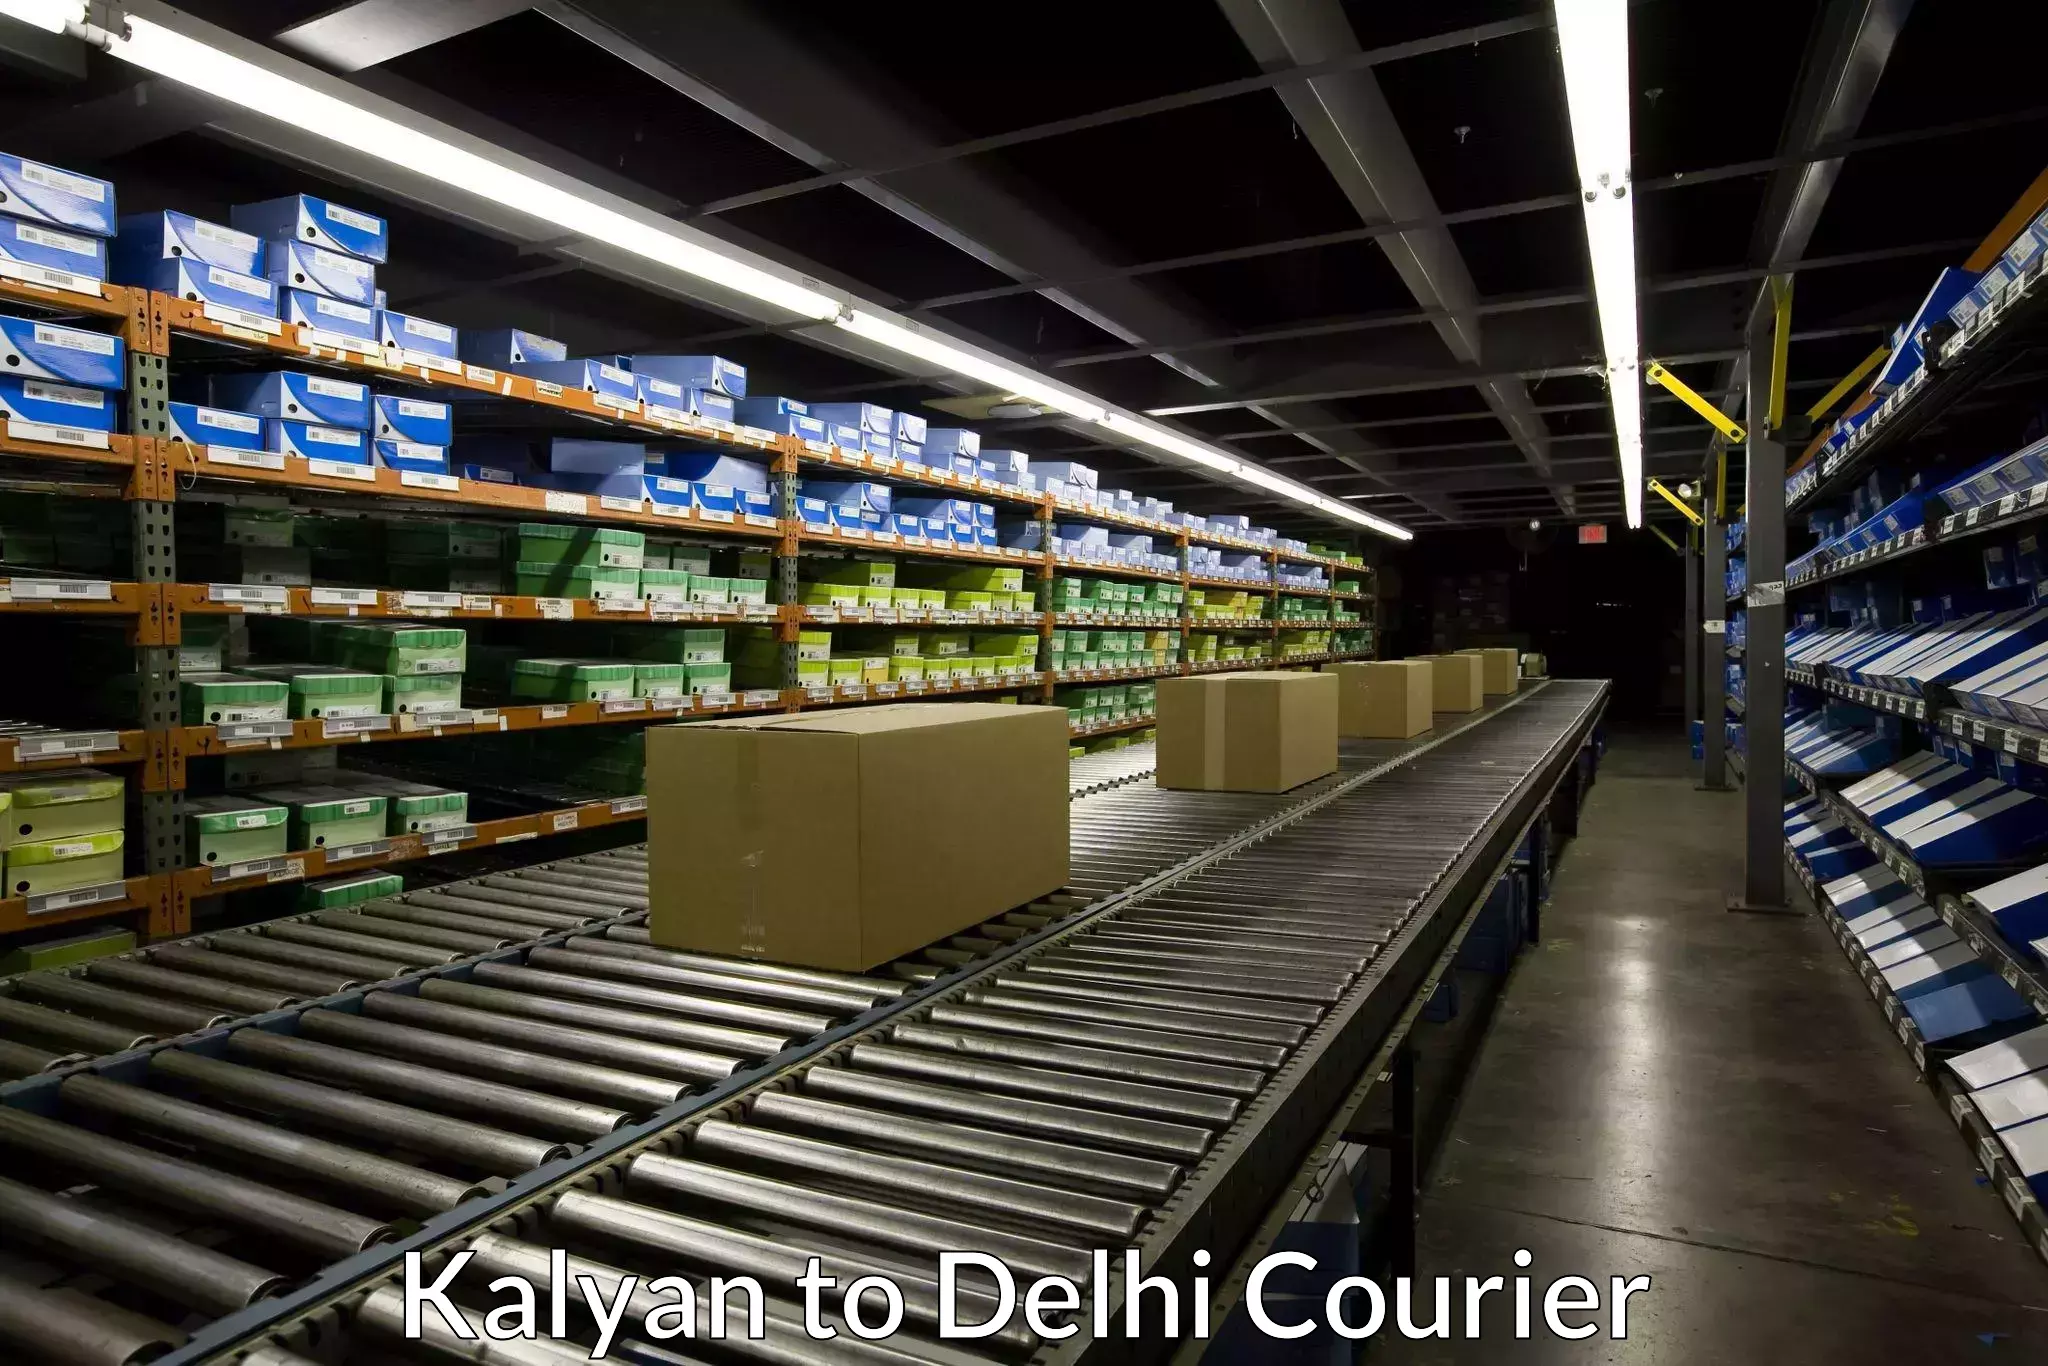 Package delivery network Kalyan to Delhi